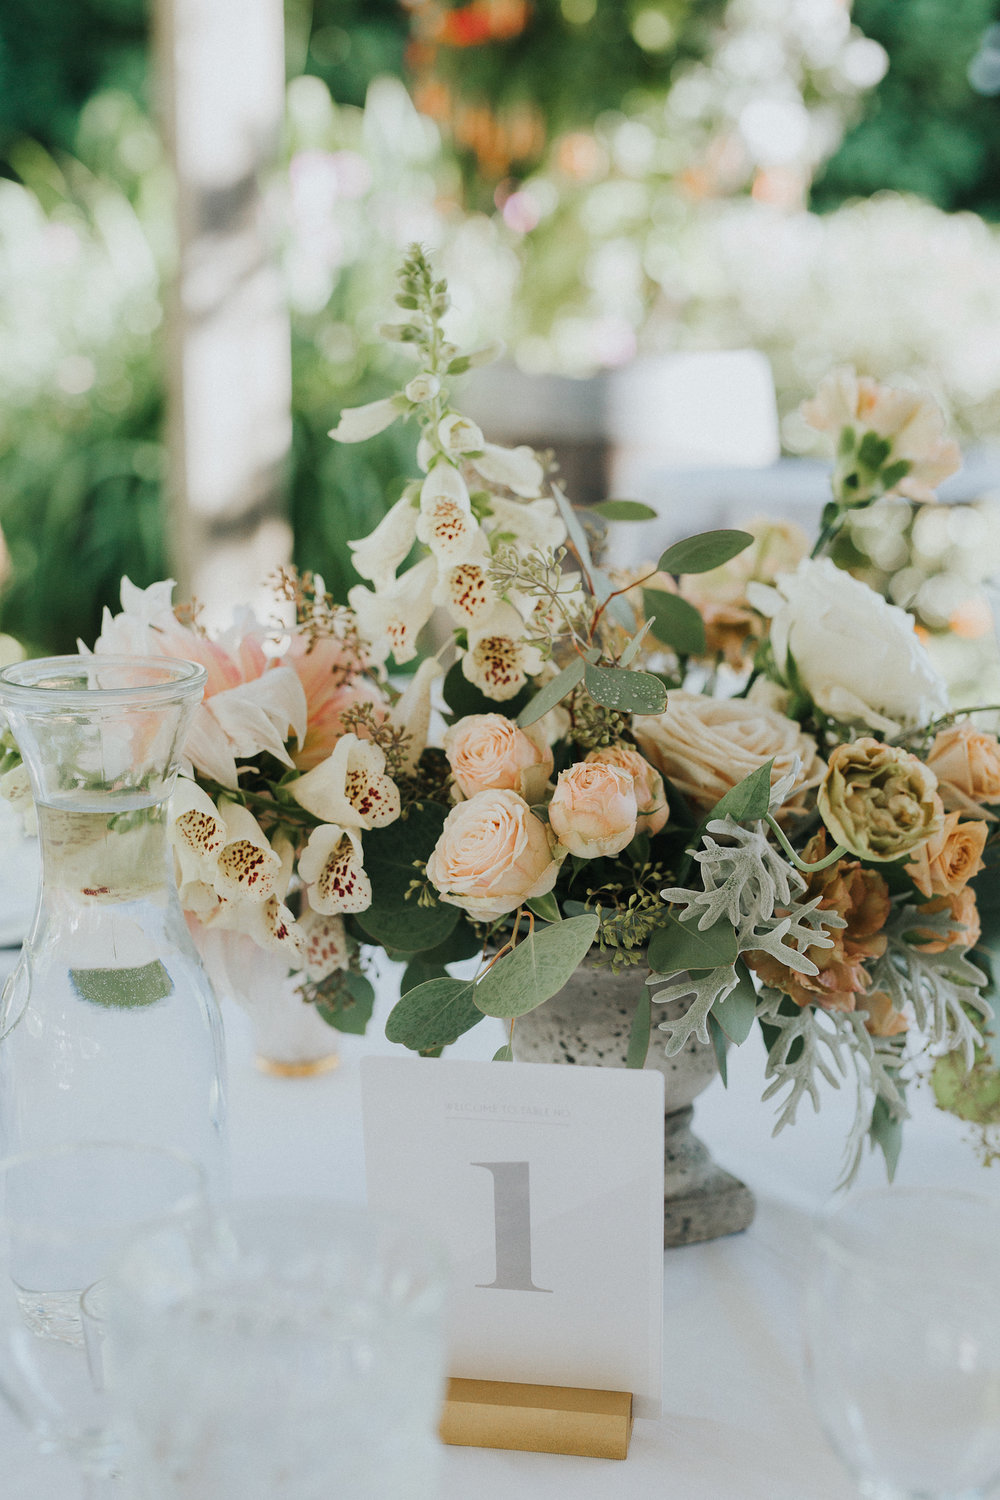 Wild Bloom Floral - Rachel Birkhofer Photography - Jessica and Phil - Real Wedding - Seattle 35.jpeg